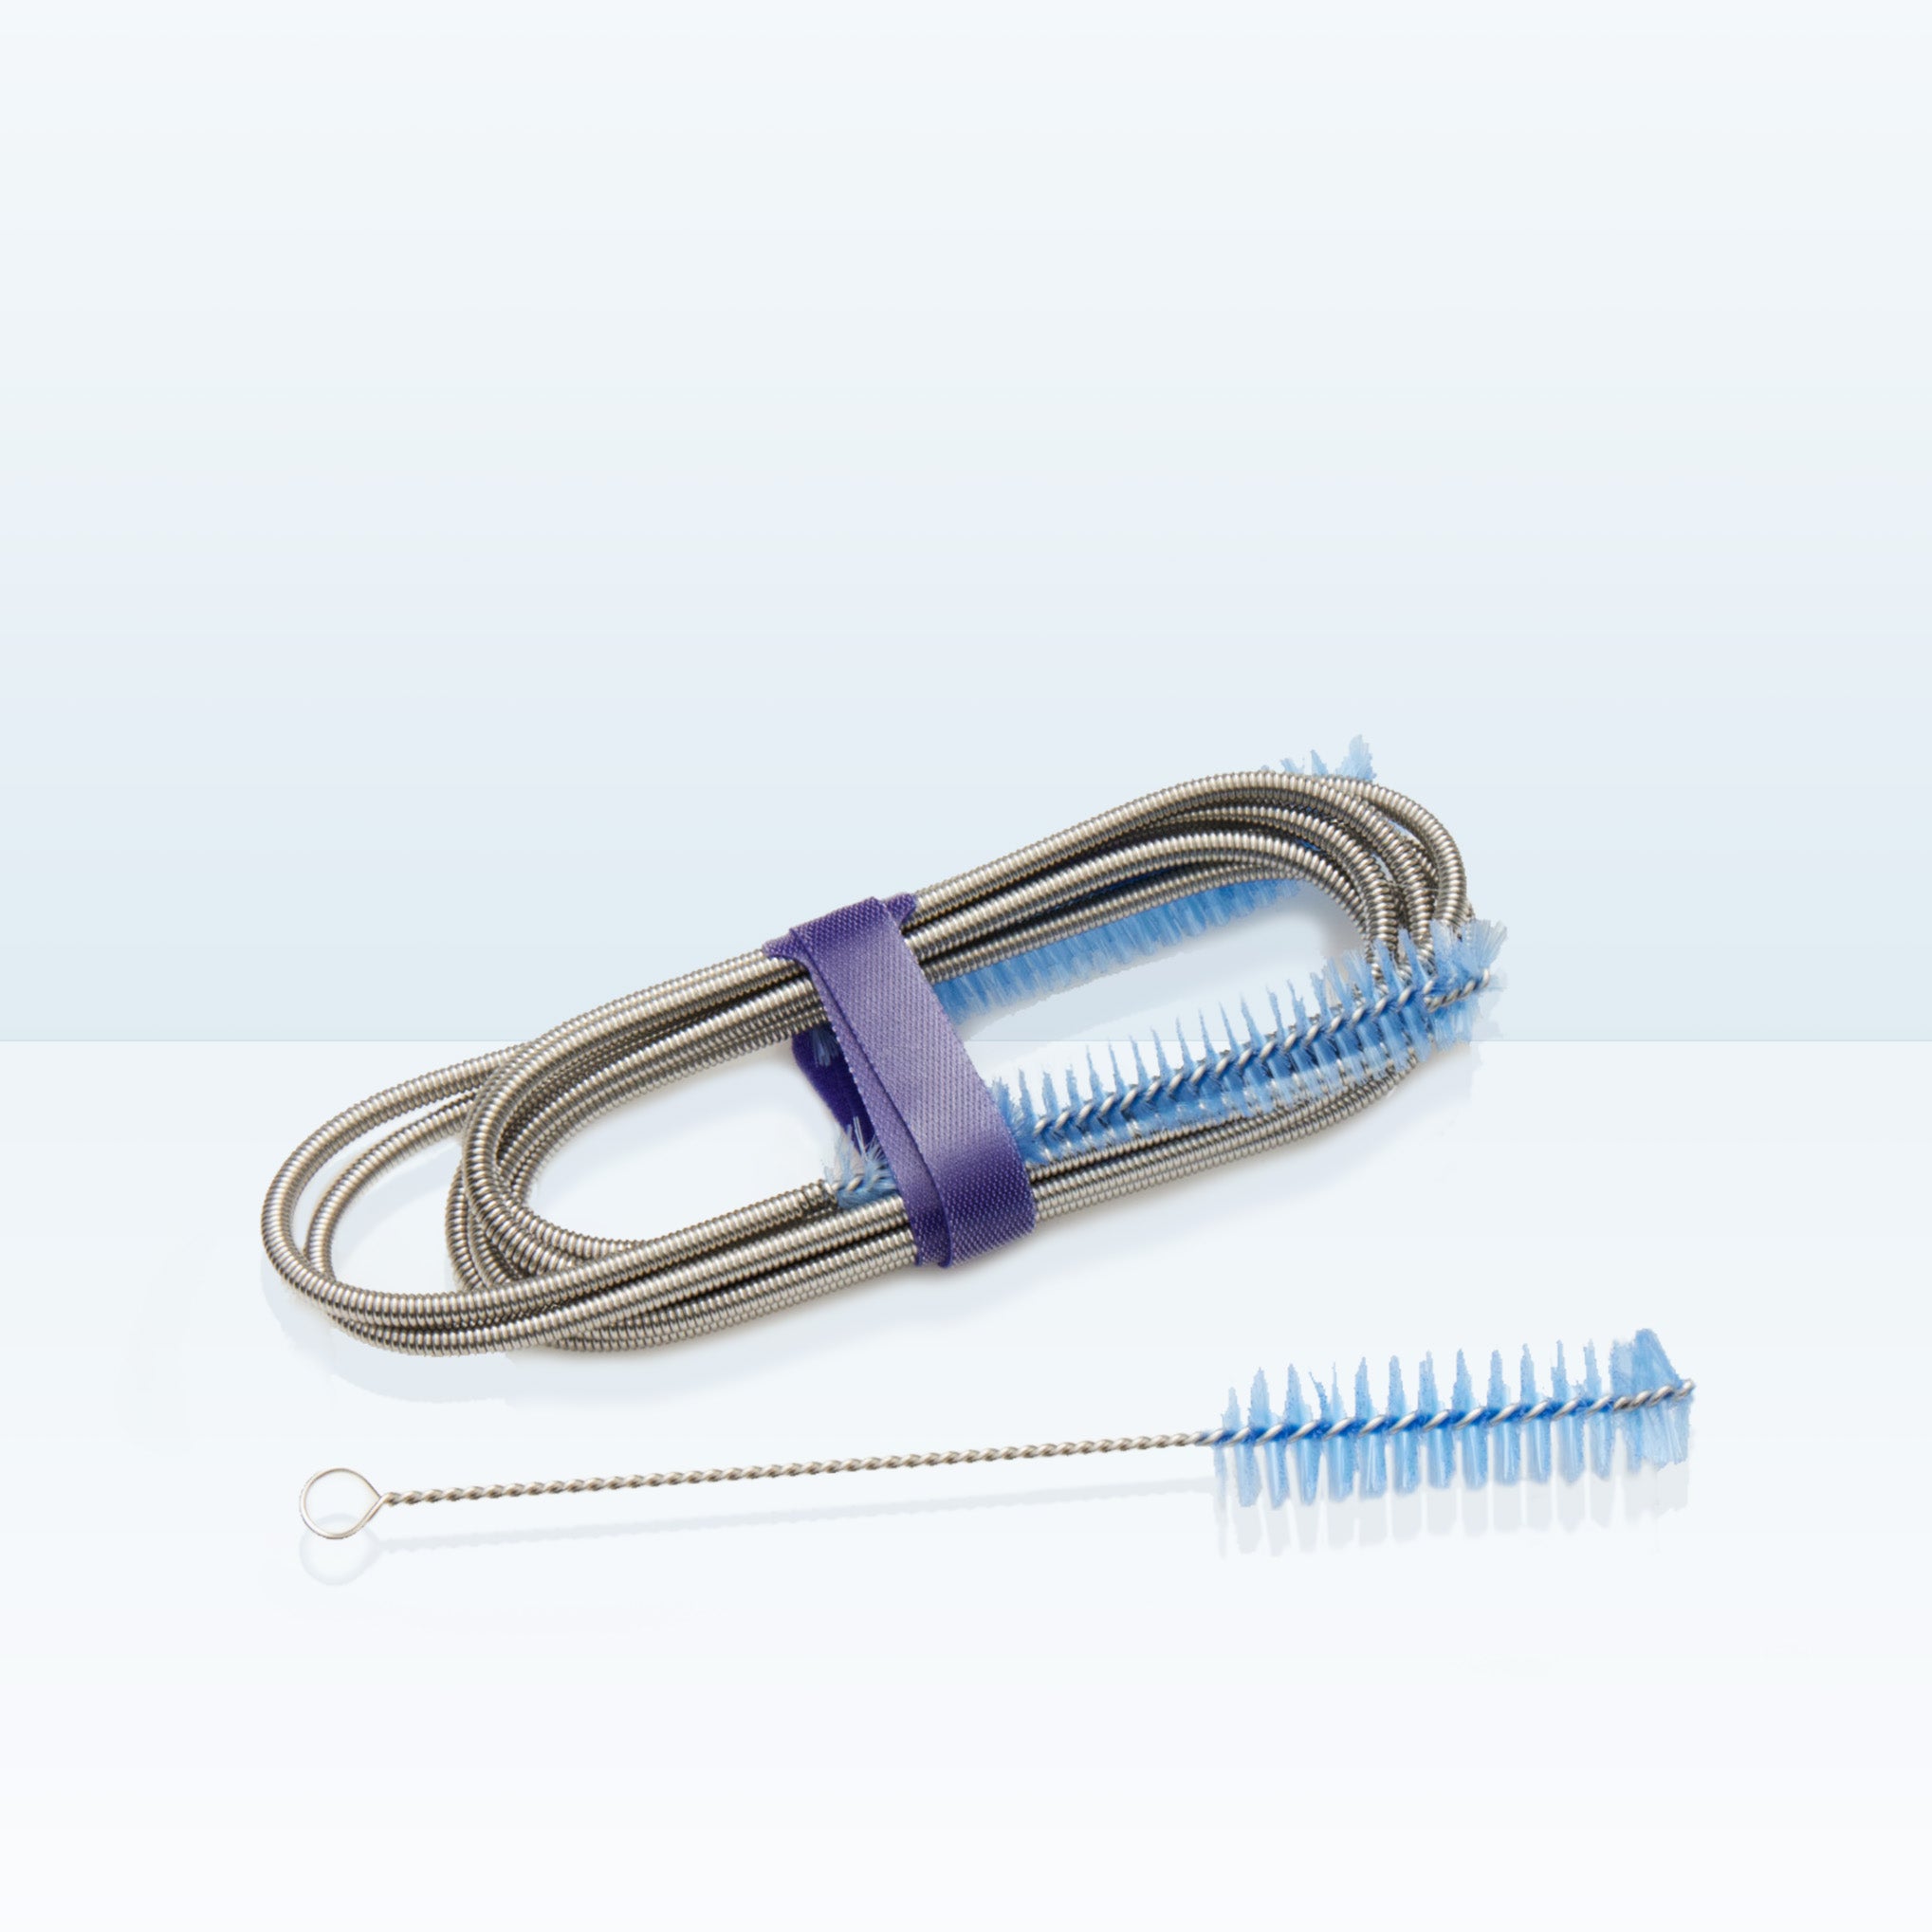 CPAP Cleaning Brush